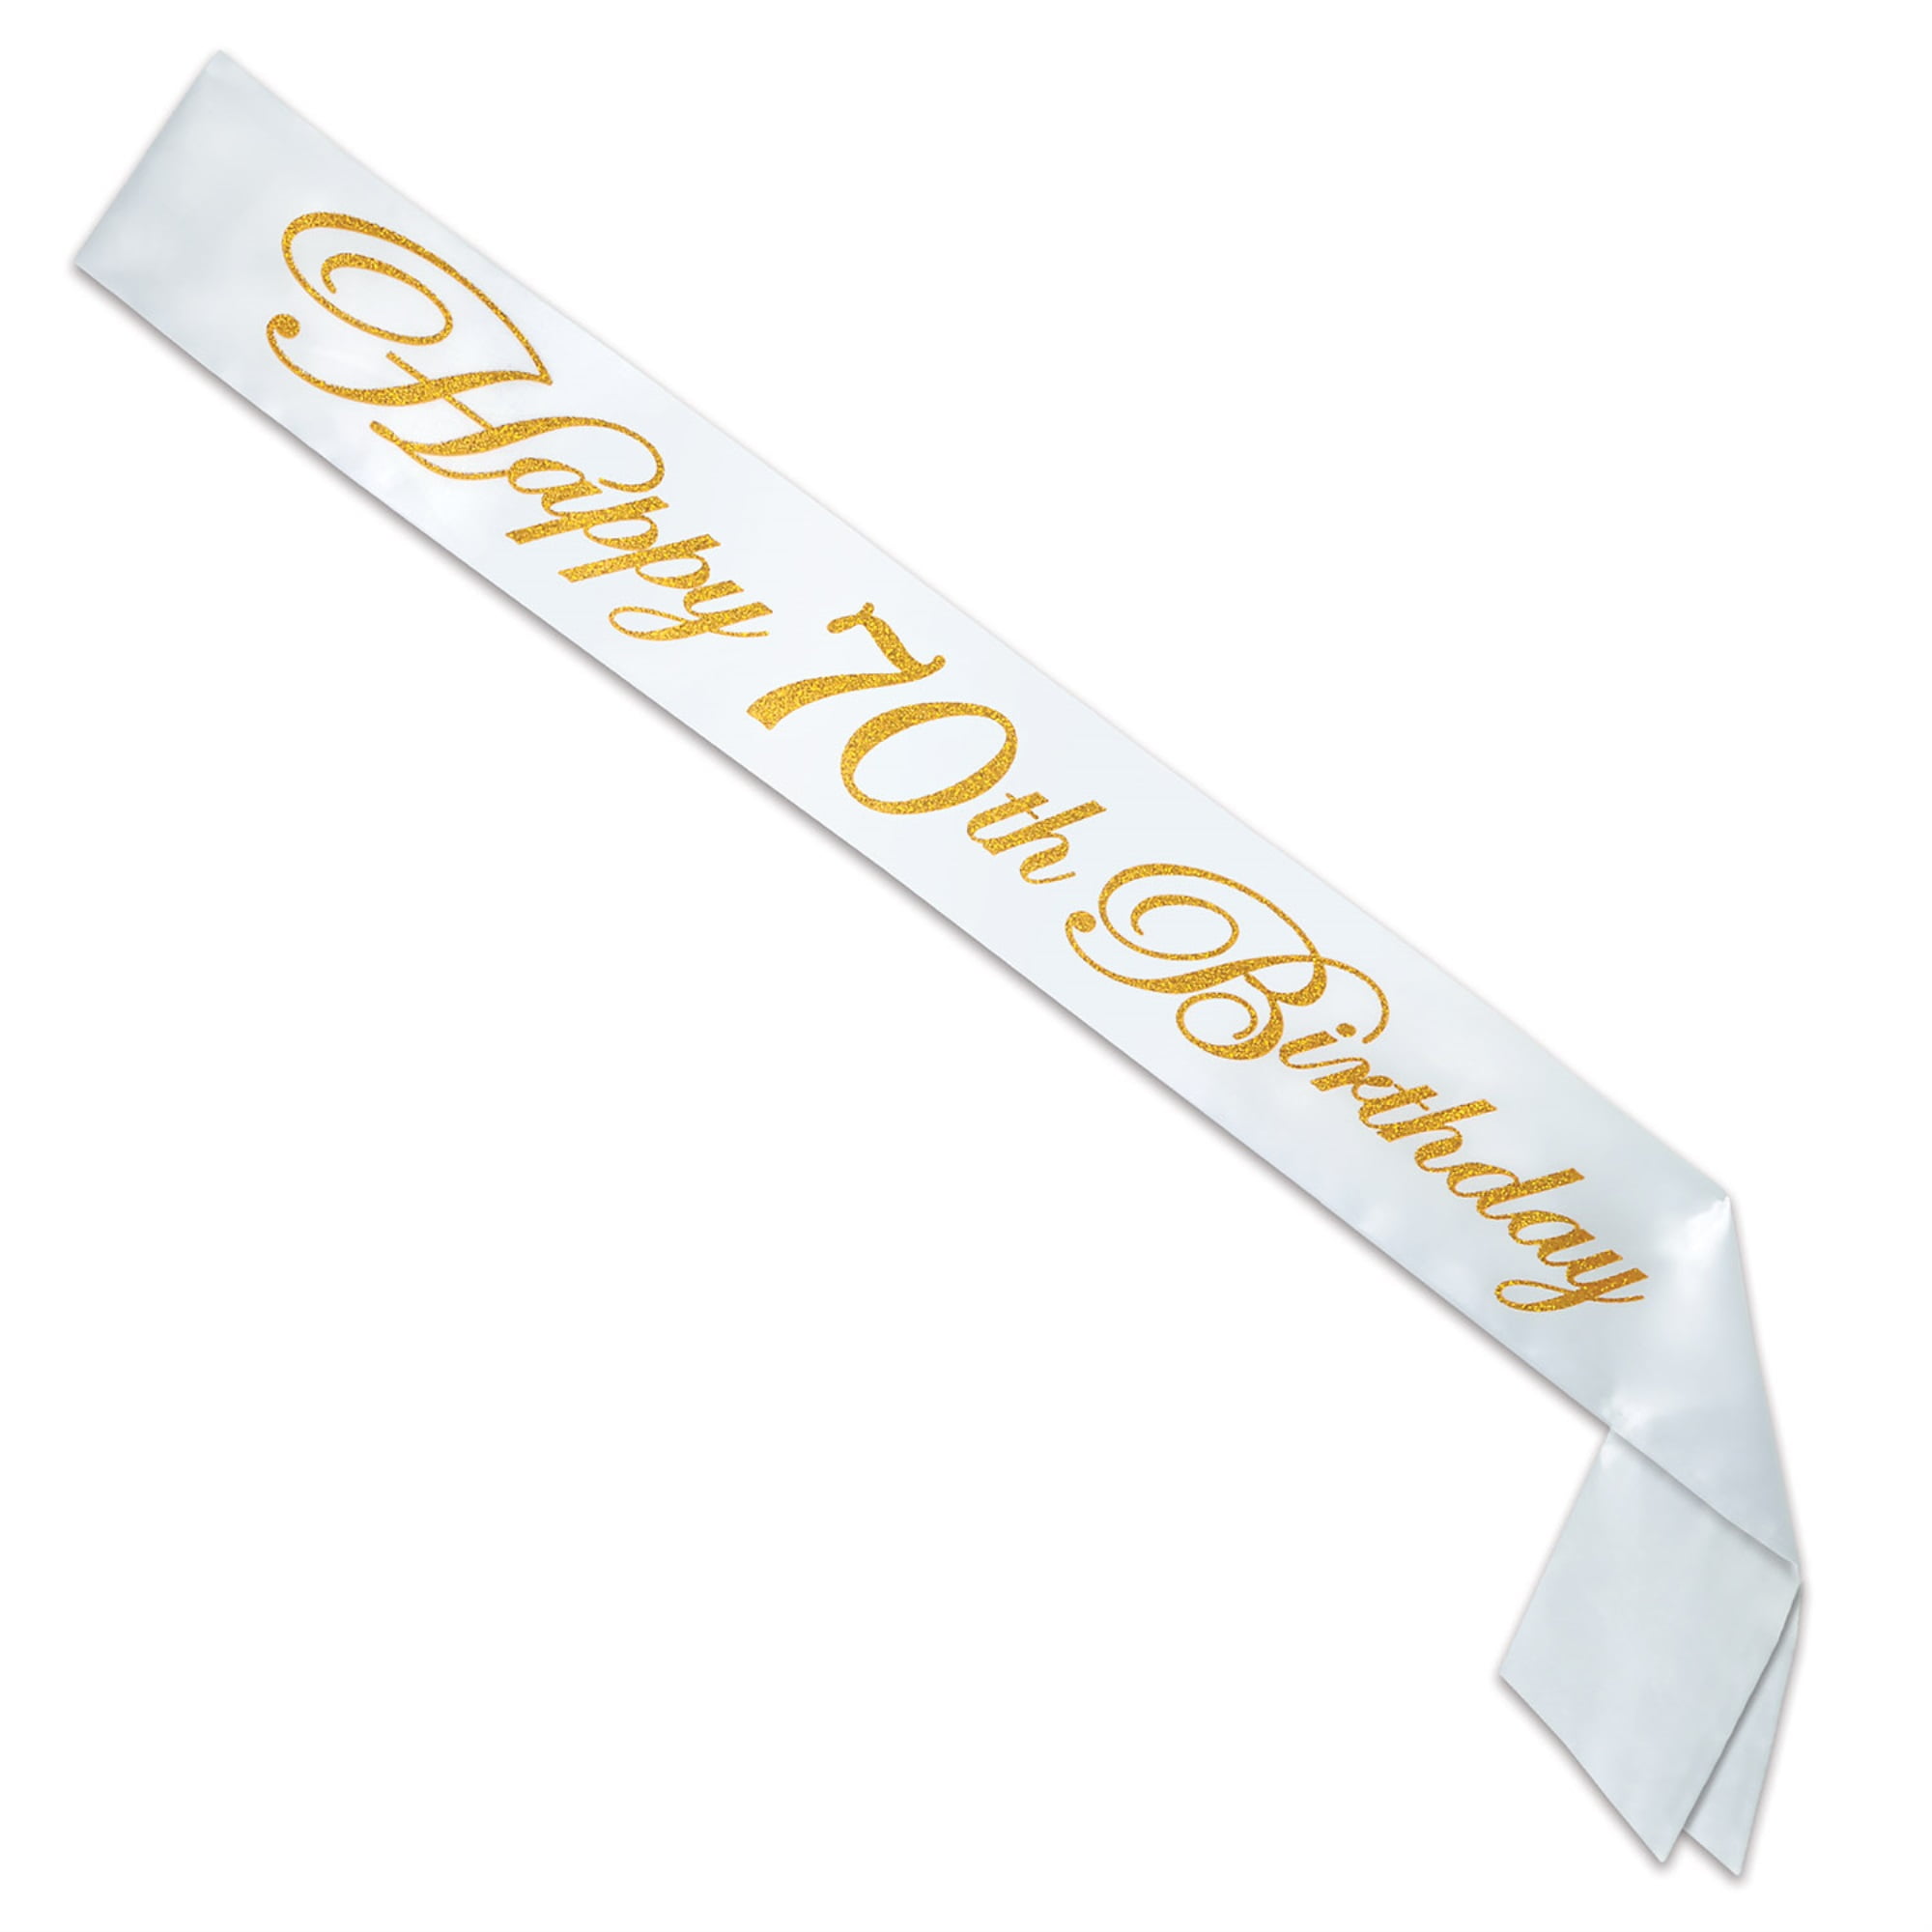 Picture of Beistle 60885-70 33 x 4 in. Glittered Happy 70th Birthday Satin Sash - Pack of 6